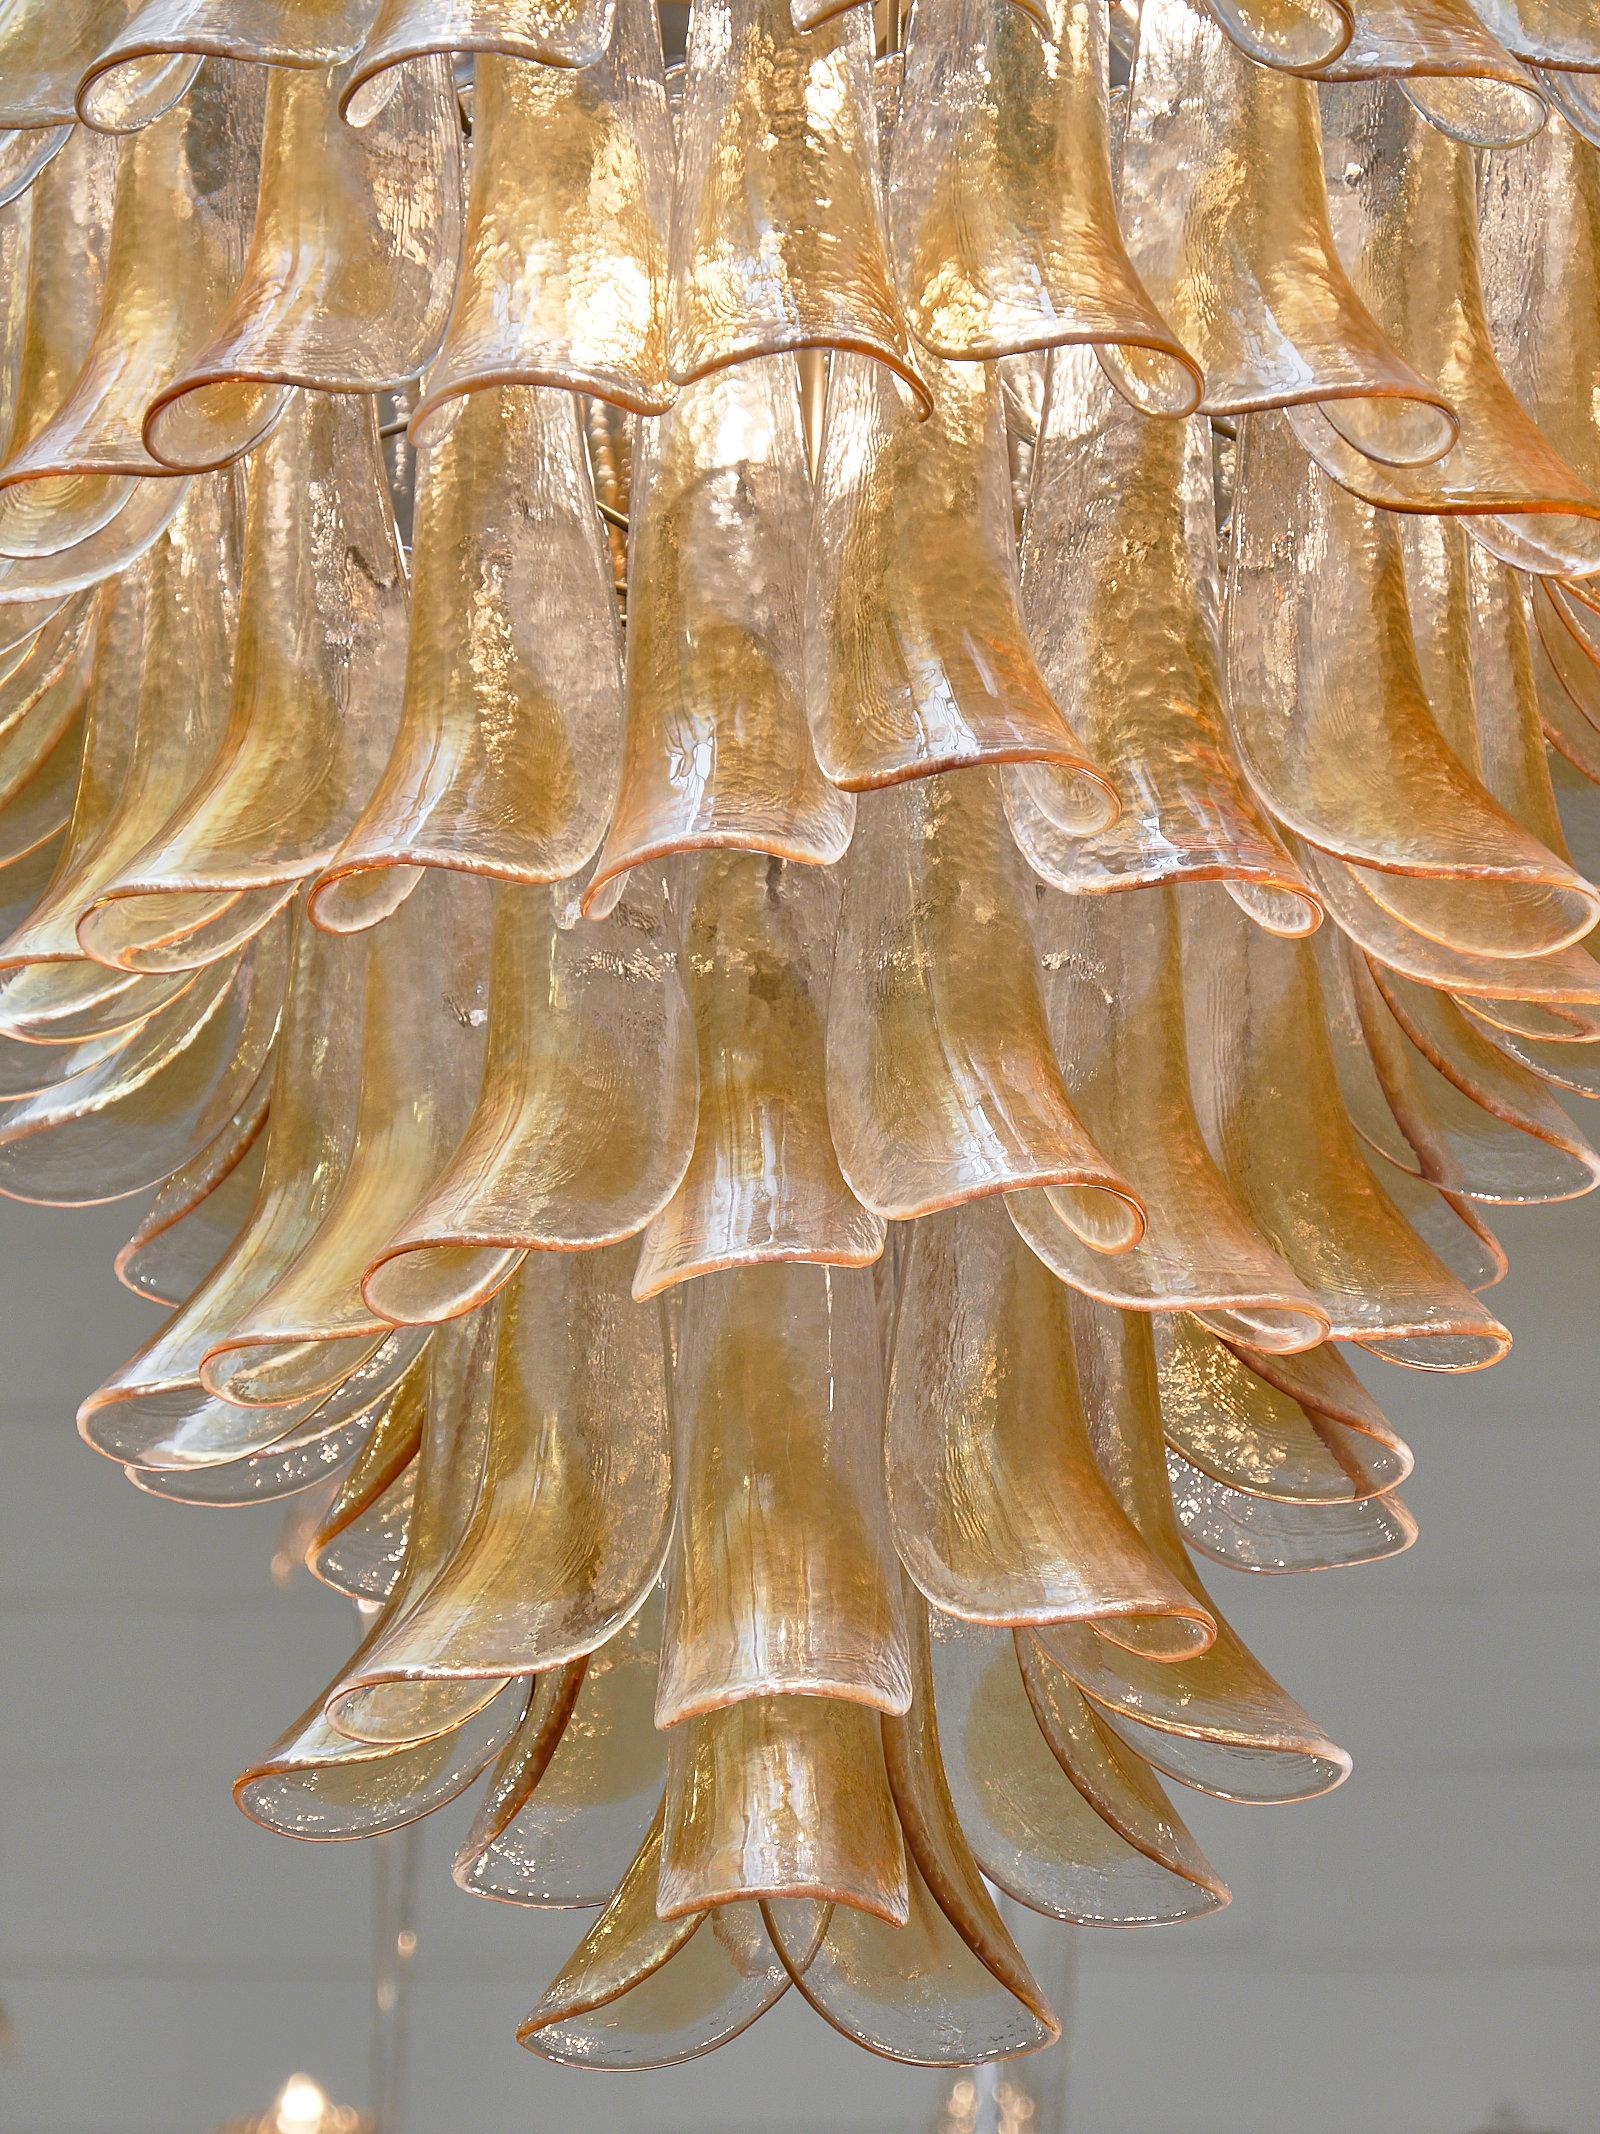 Orange and Clear Murano Glass “Selle” Chandelier For Sale 2